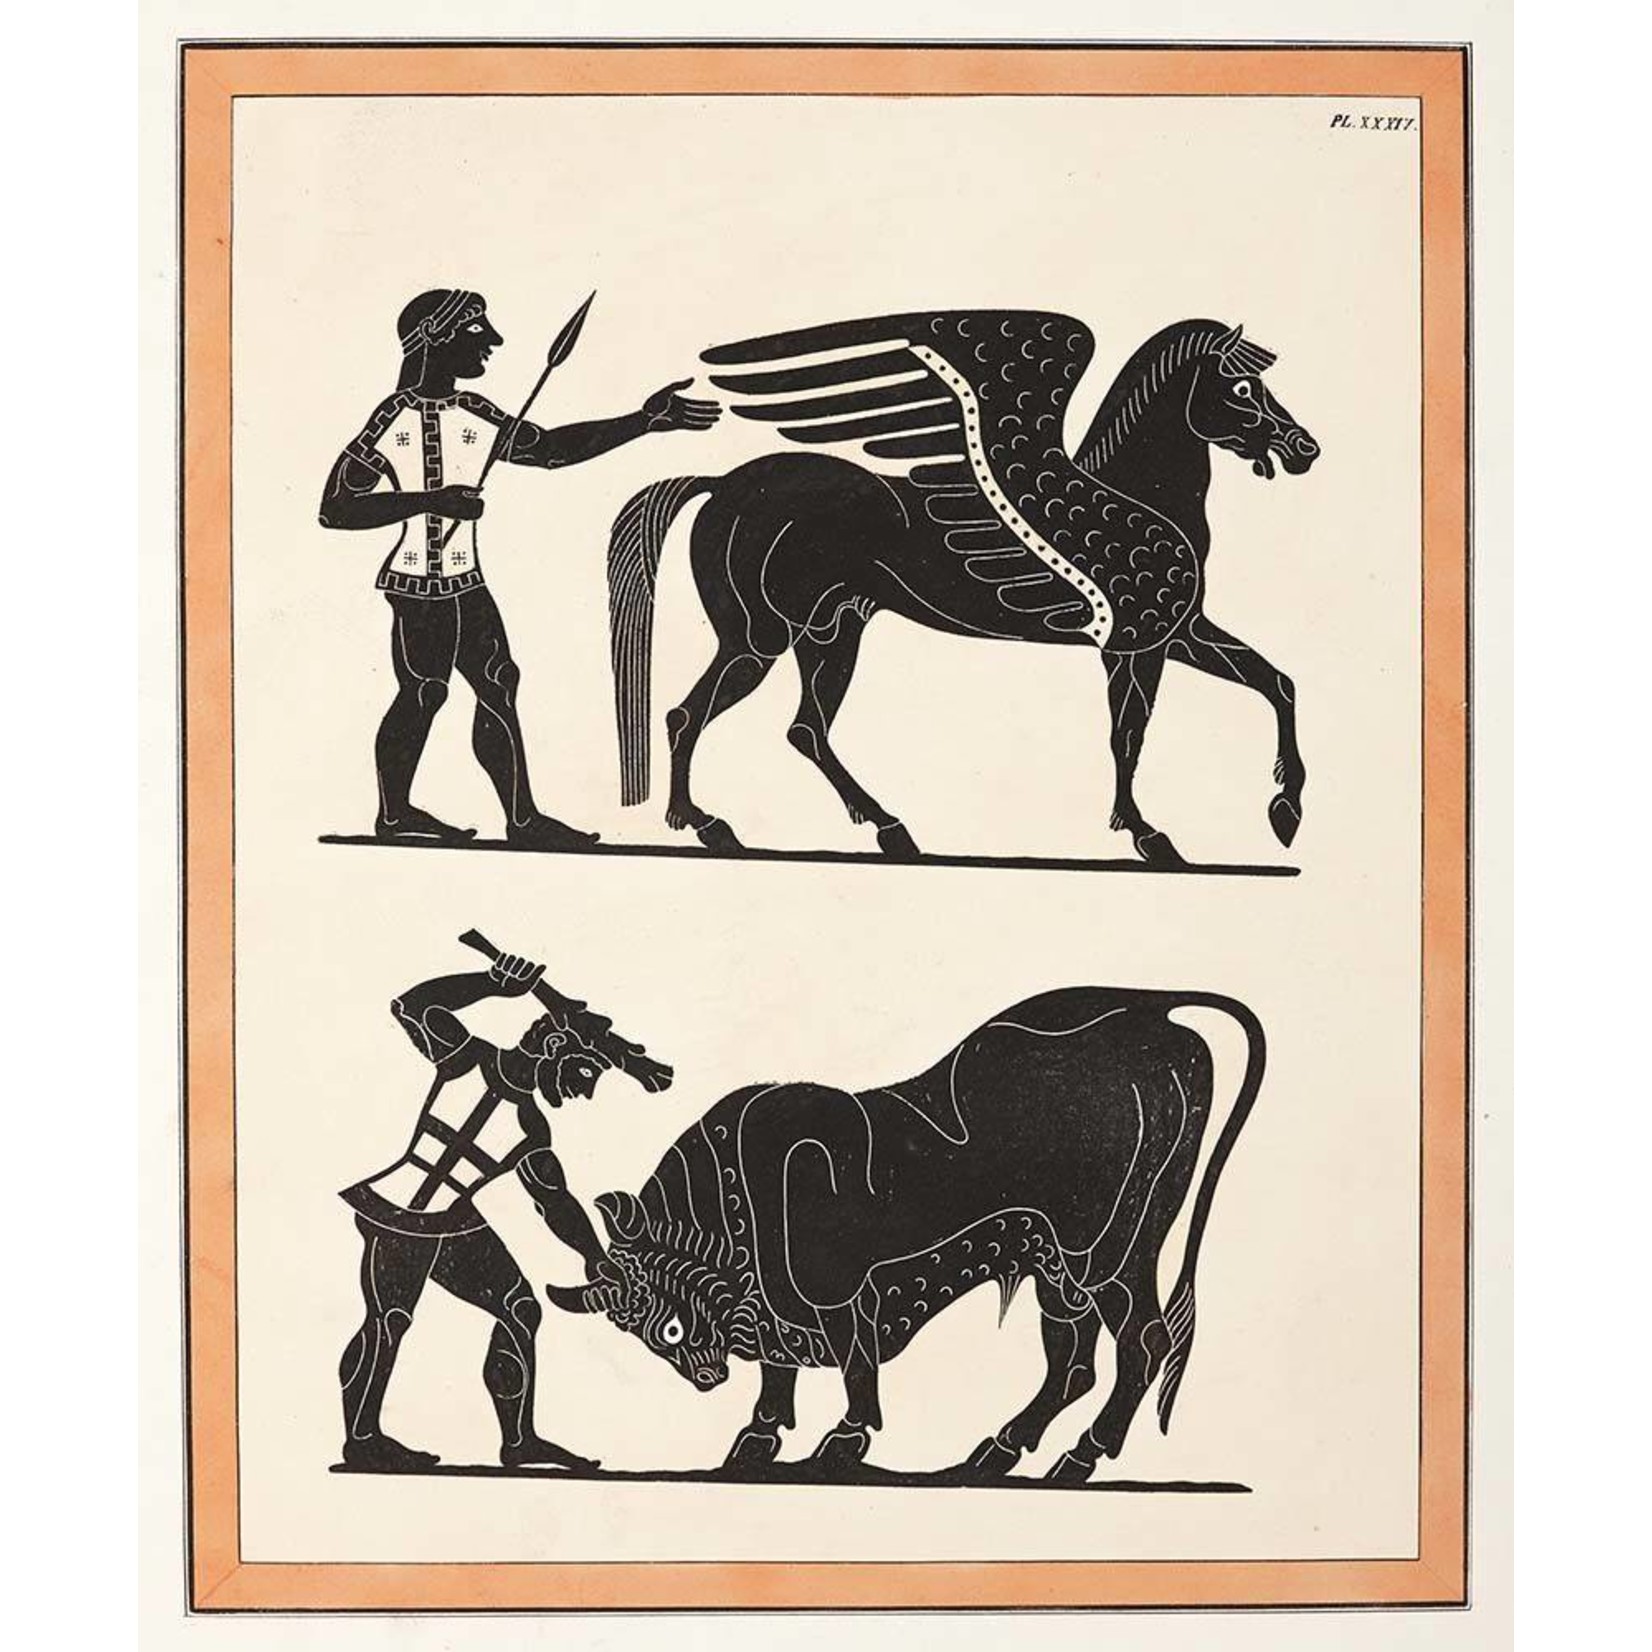 Framed Print on Rag Paper: Painting from an Etruscan vase [Pl. XXXIV]